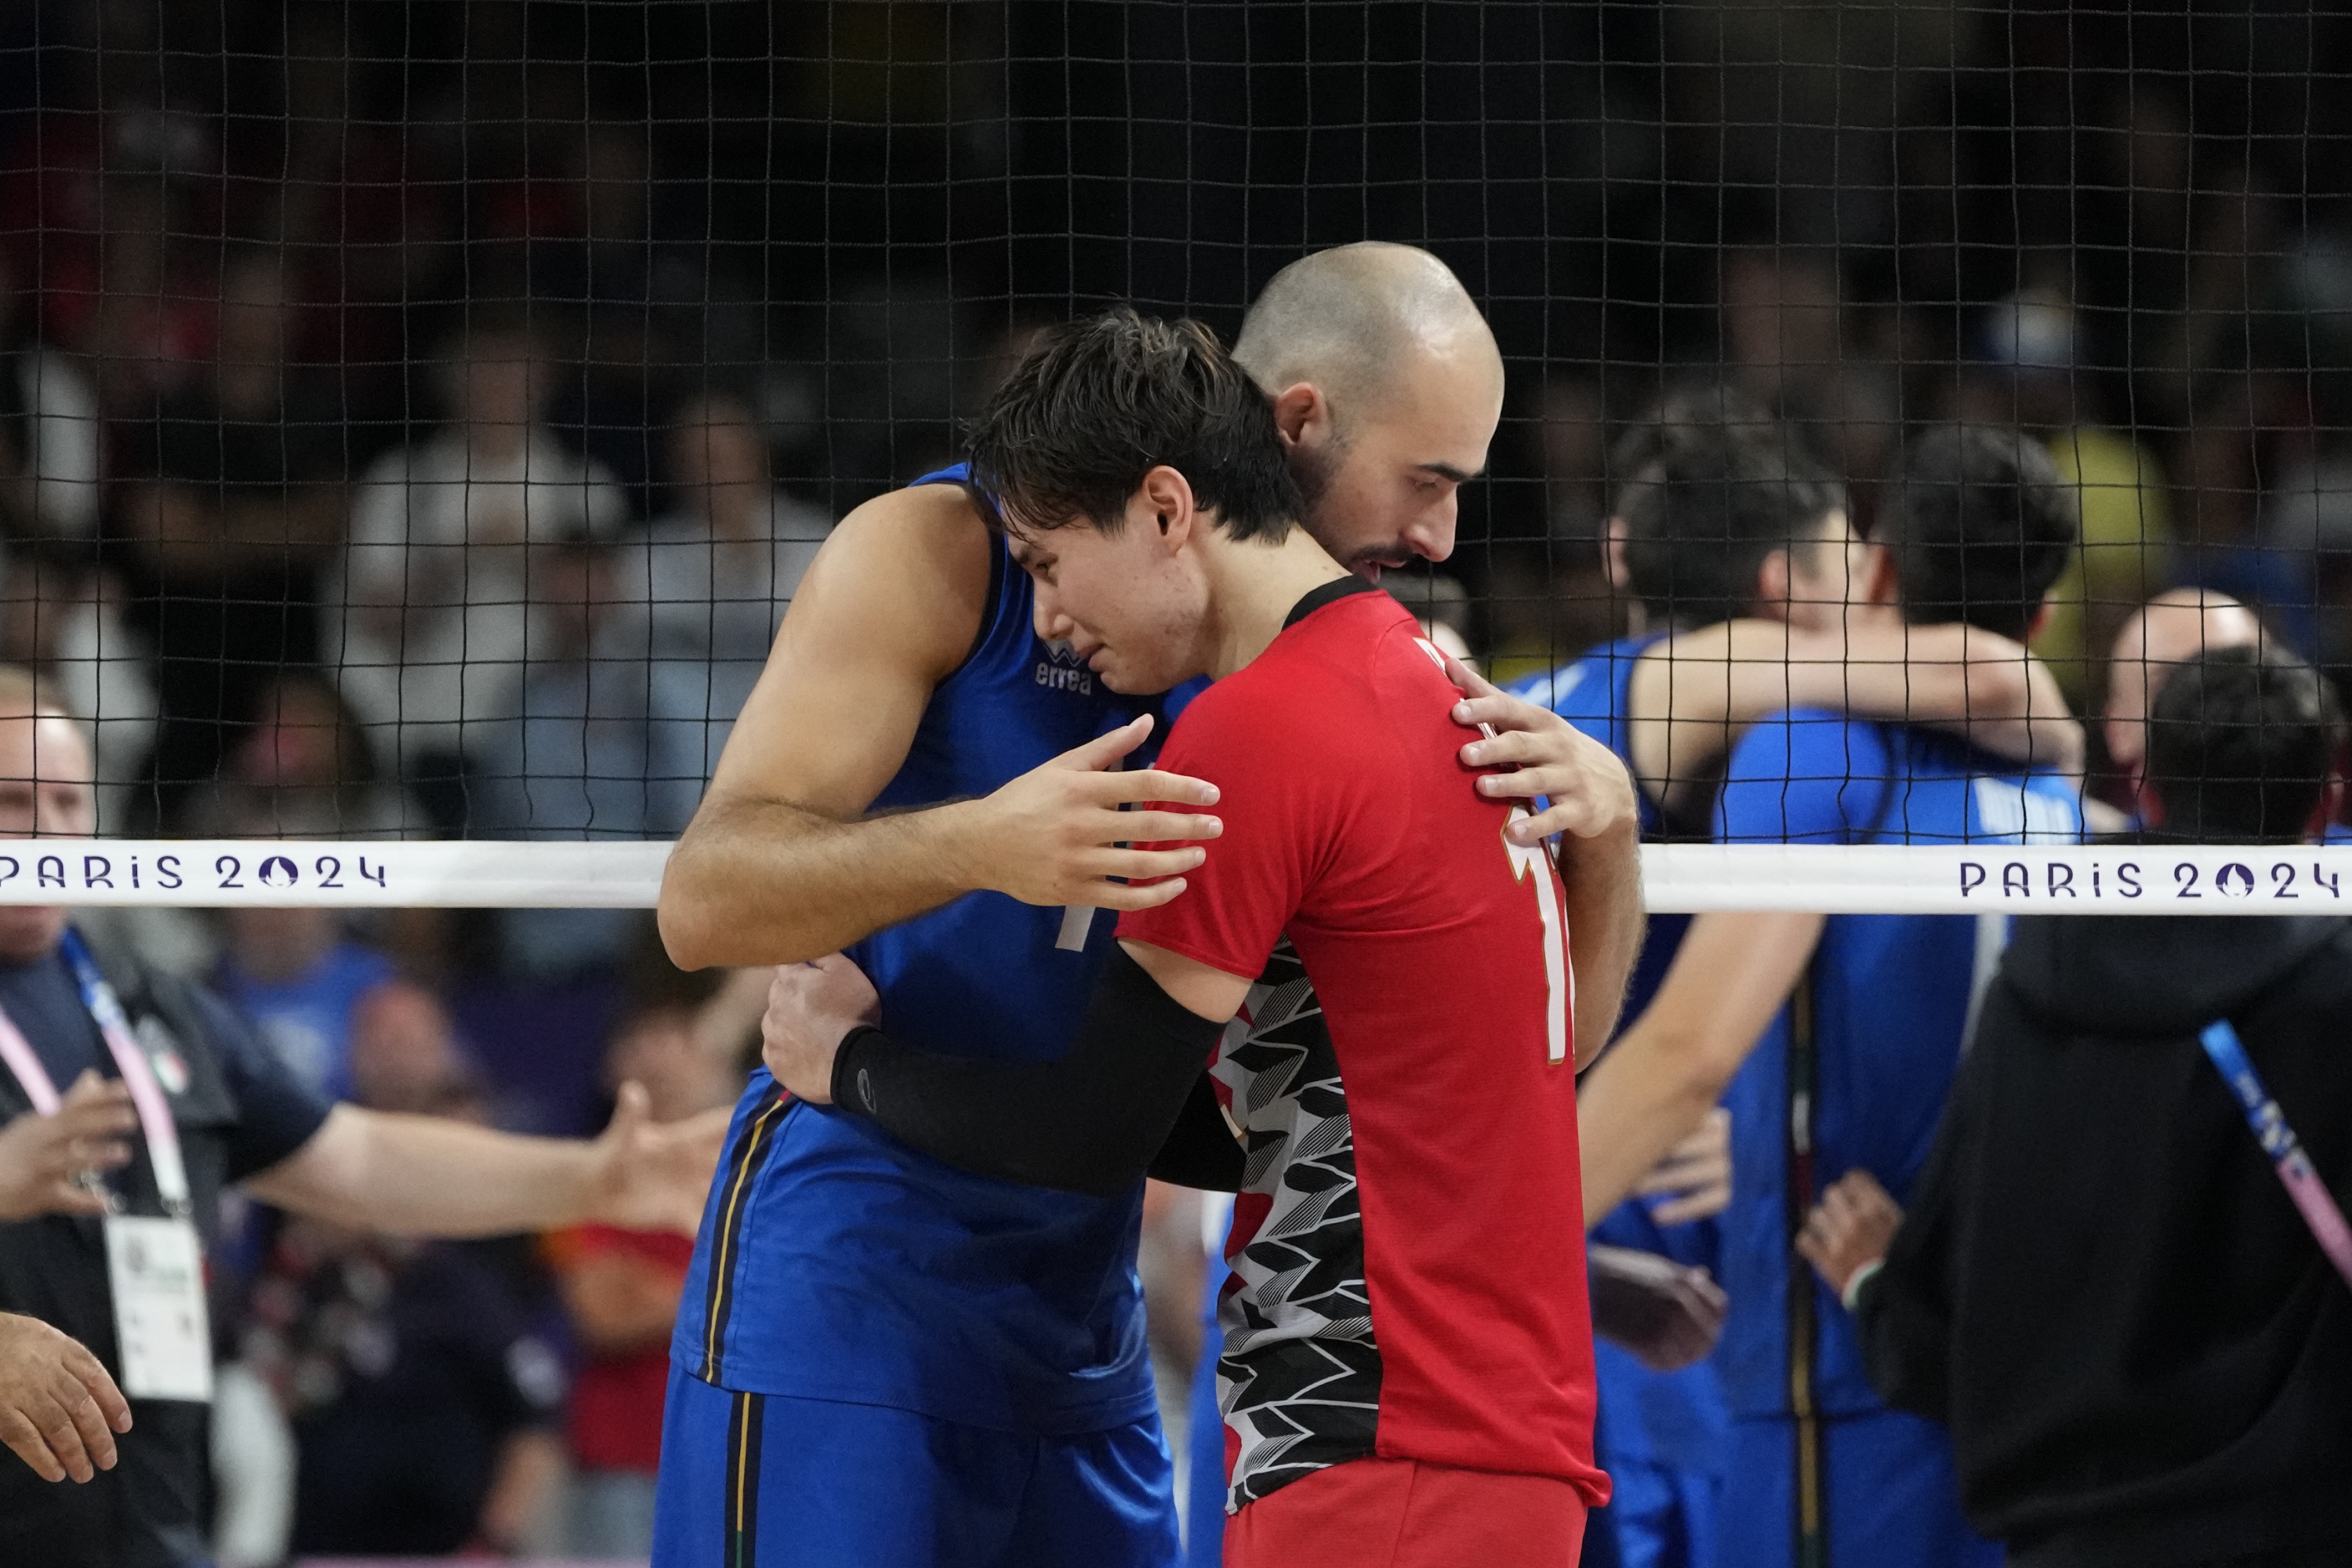 Gianluca Galassi, of Italy,, left, comforts to Ran Takahashi, of Japan, at the end of the men's quarter final volleyball match between Italy and Japan at the 2024 Summer Olympics, Monday, Aug. 5, 2024, in Paris, France. (AP Photo/Alessandra Tarantino)